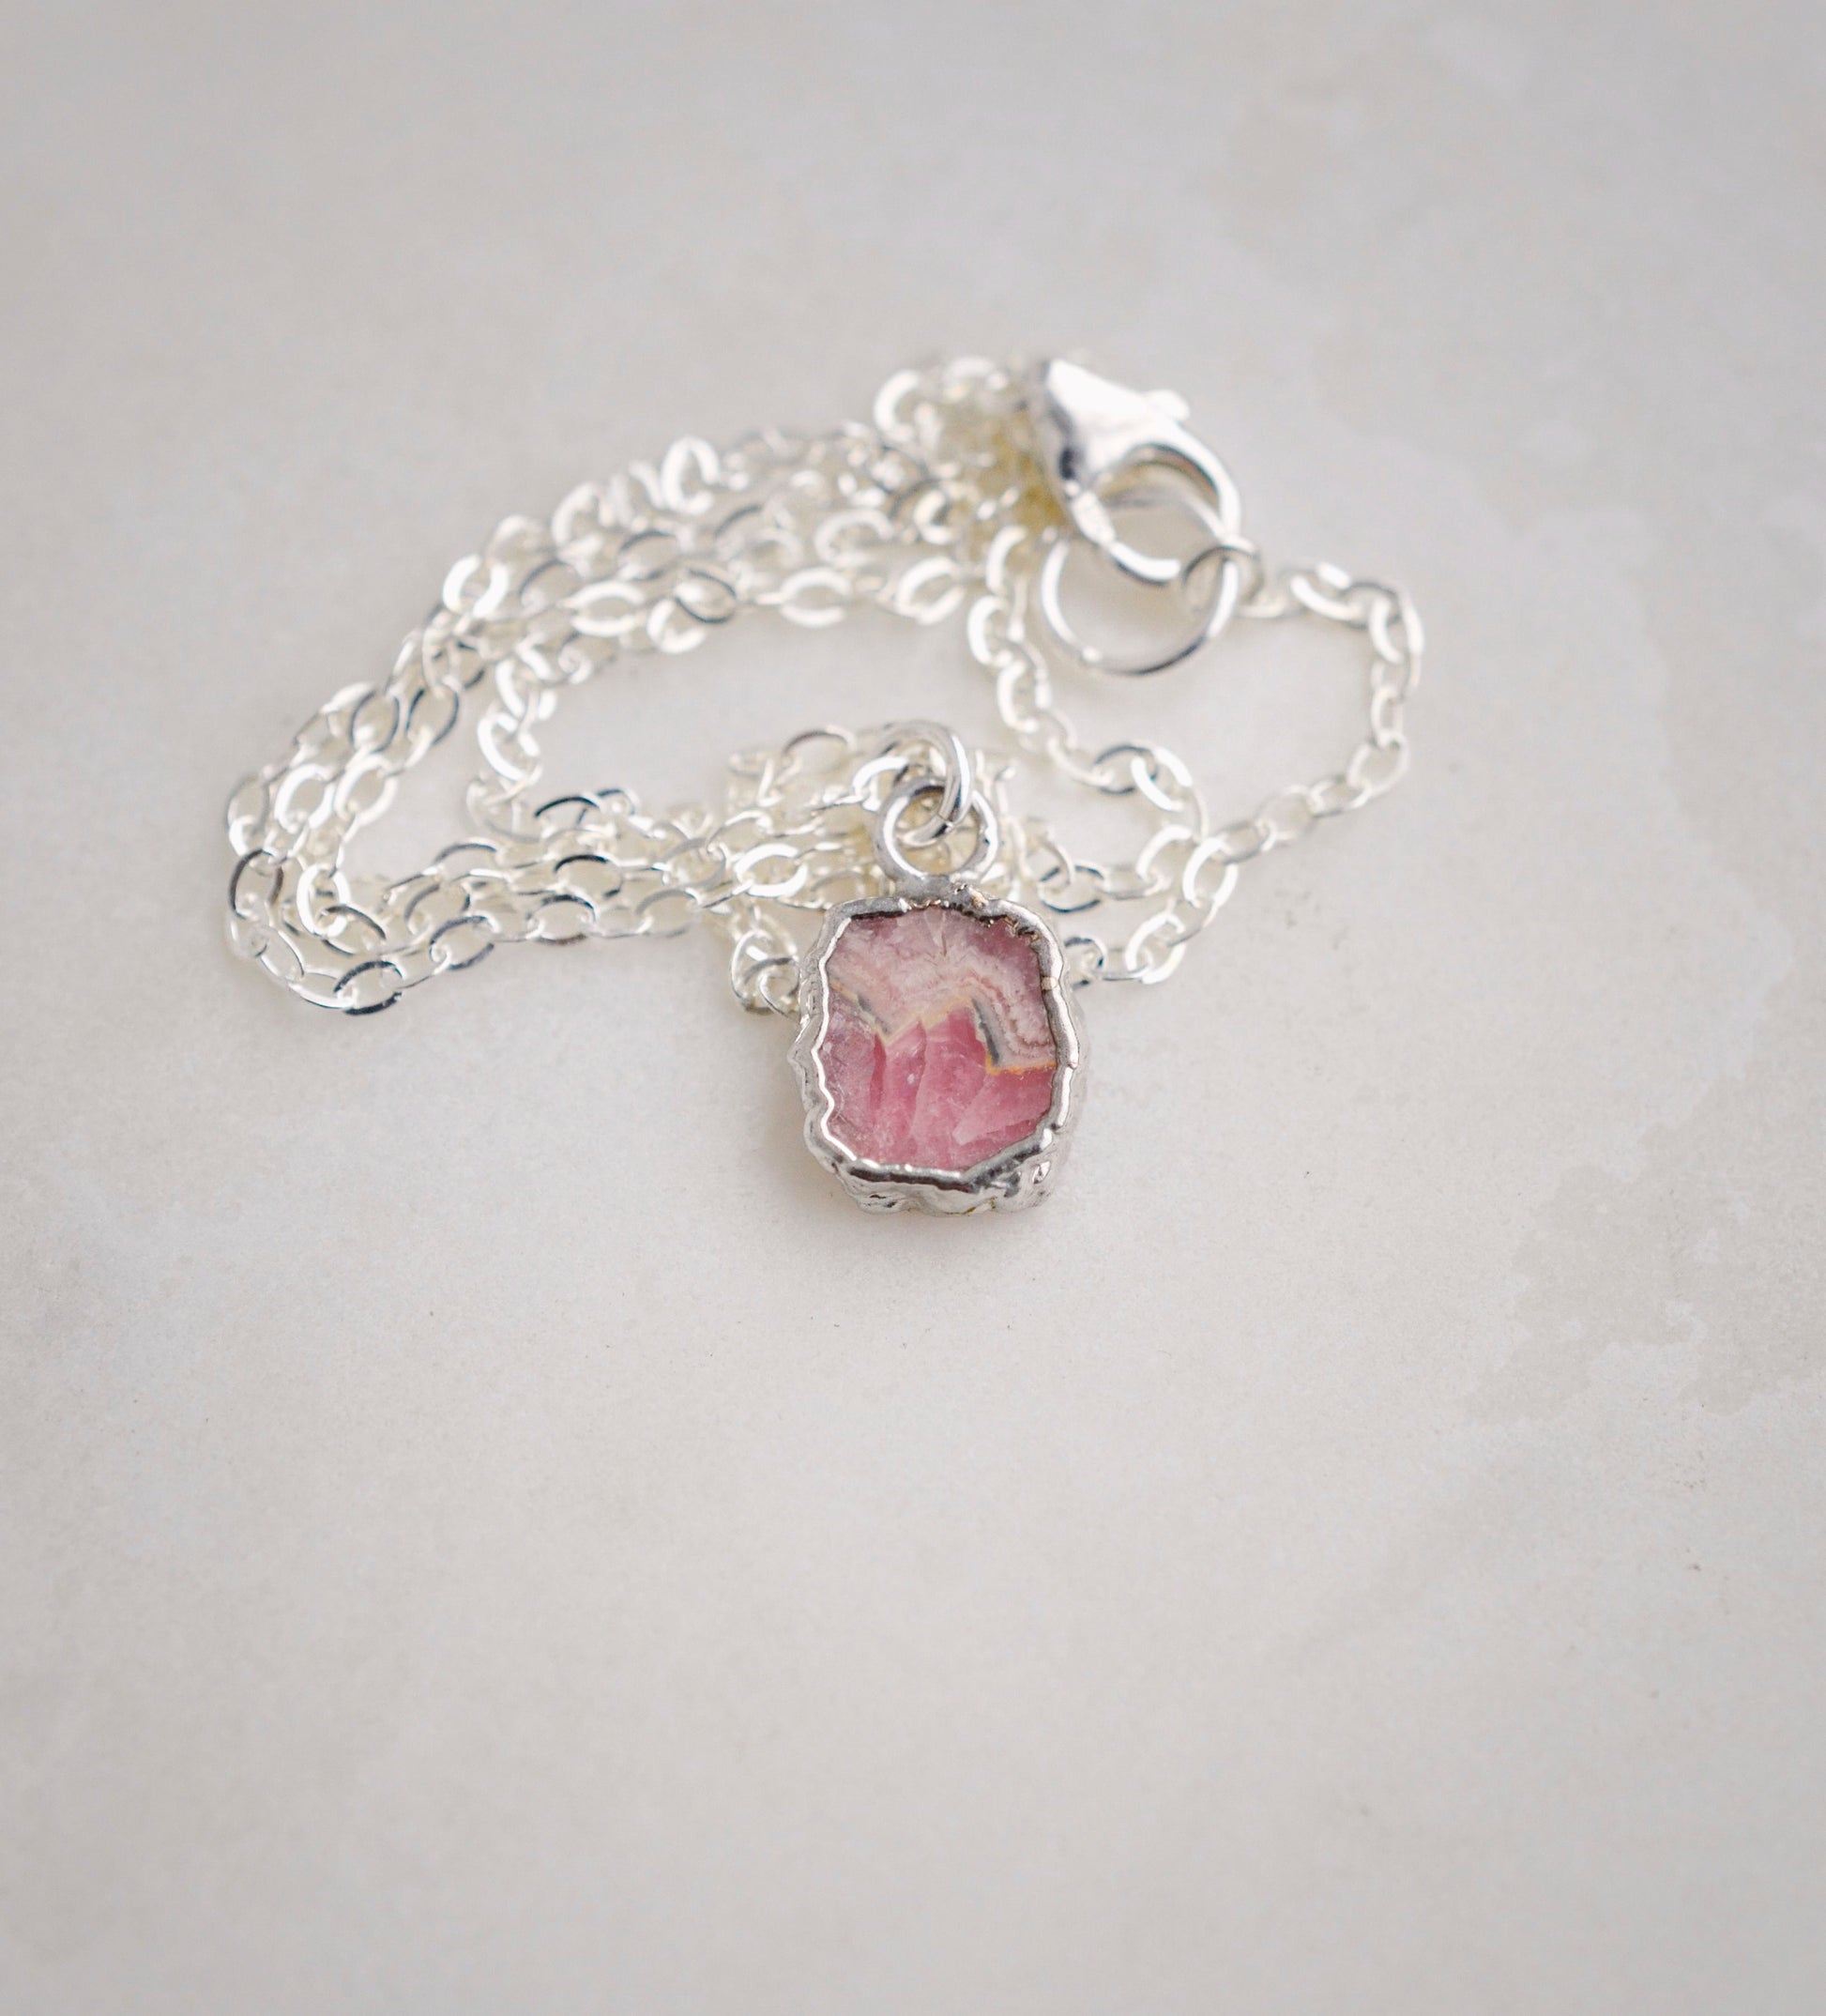 Natural pink Rhodochrosite sliced gemstone bezeled in sterling silver and set on a sterling chain. Showing a lobster claw clasp.